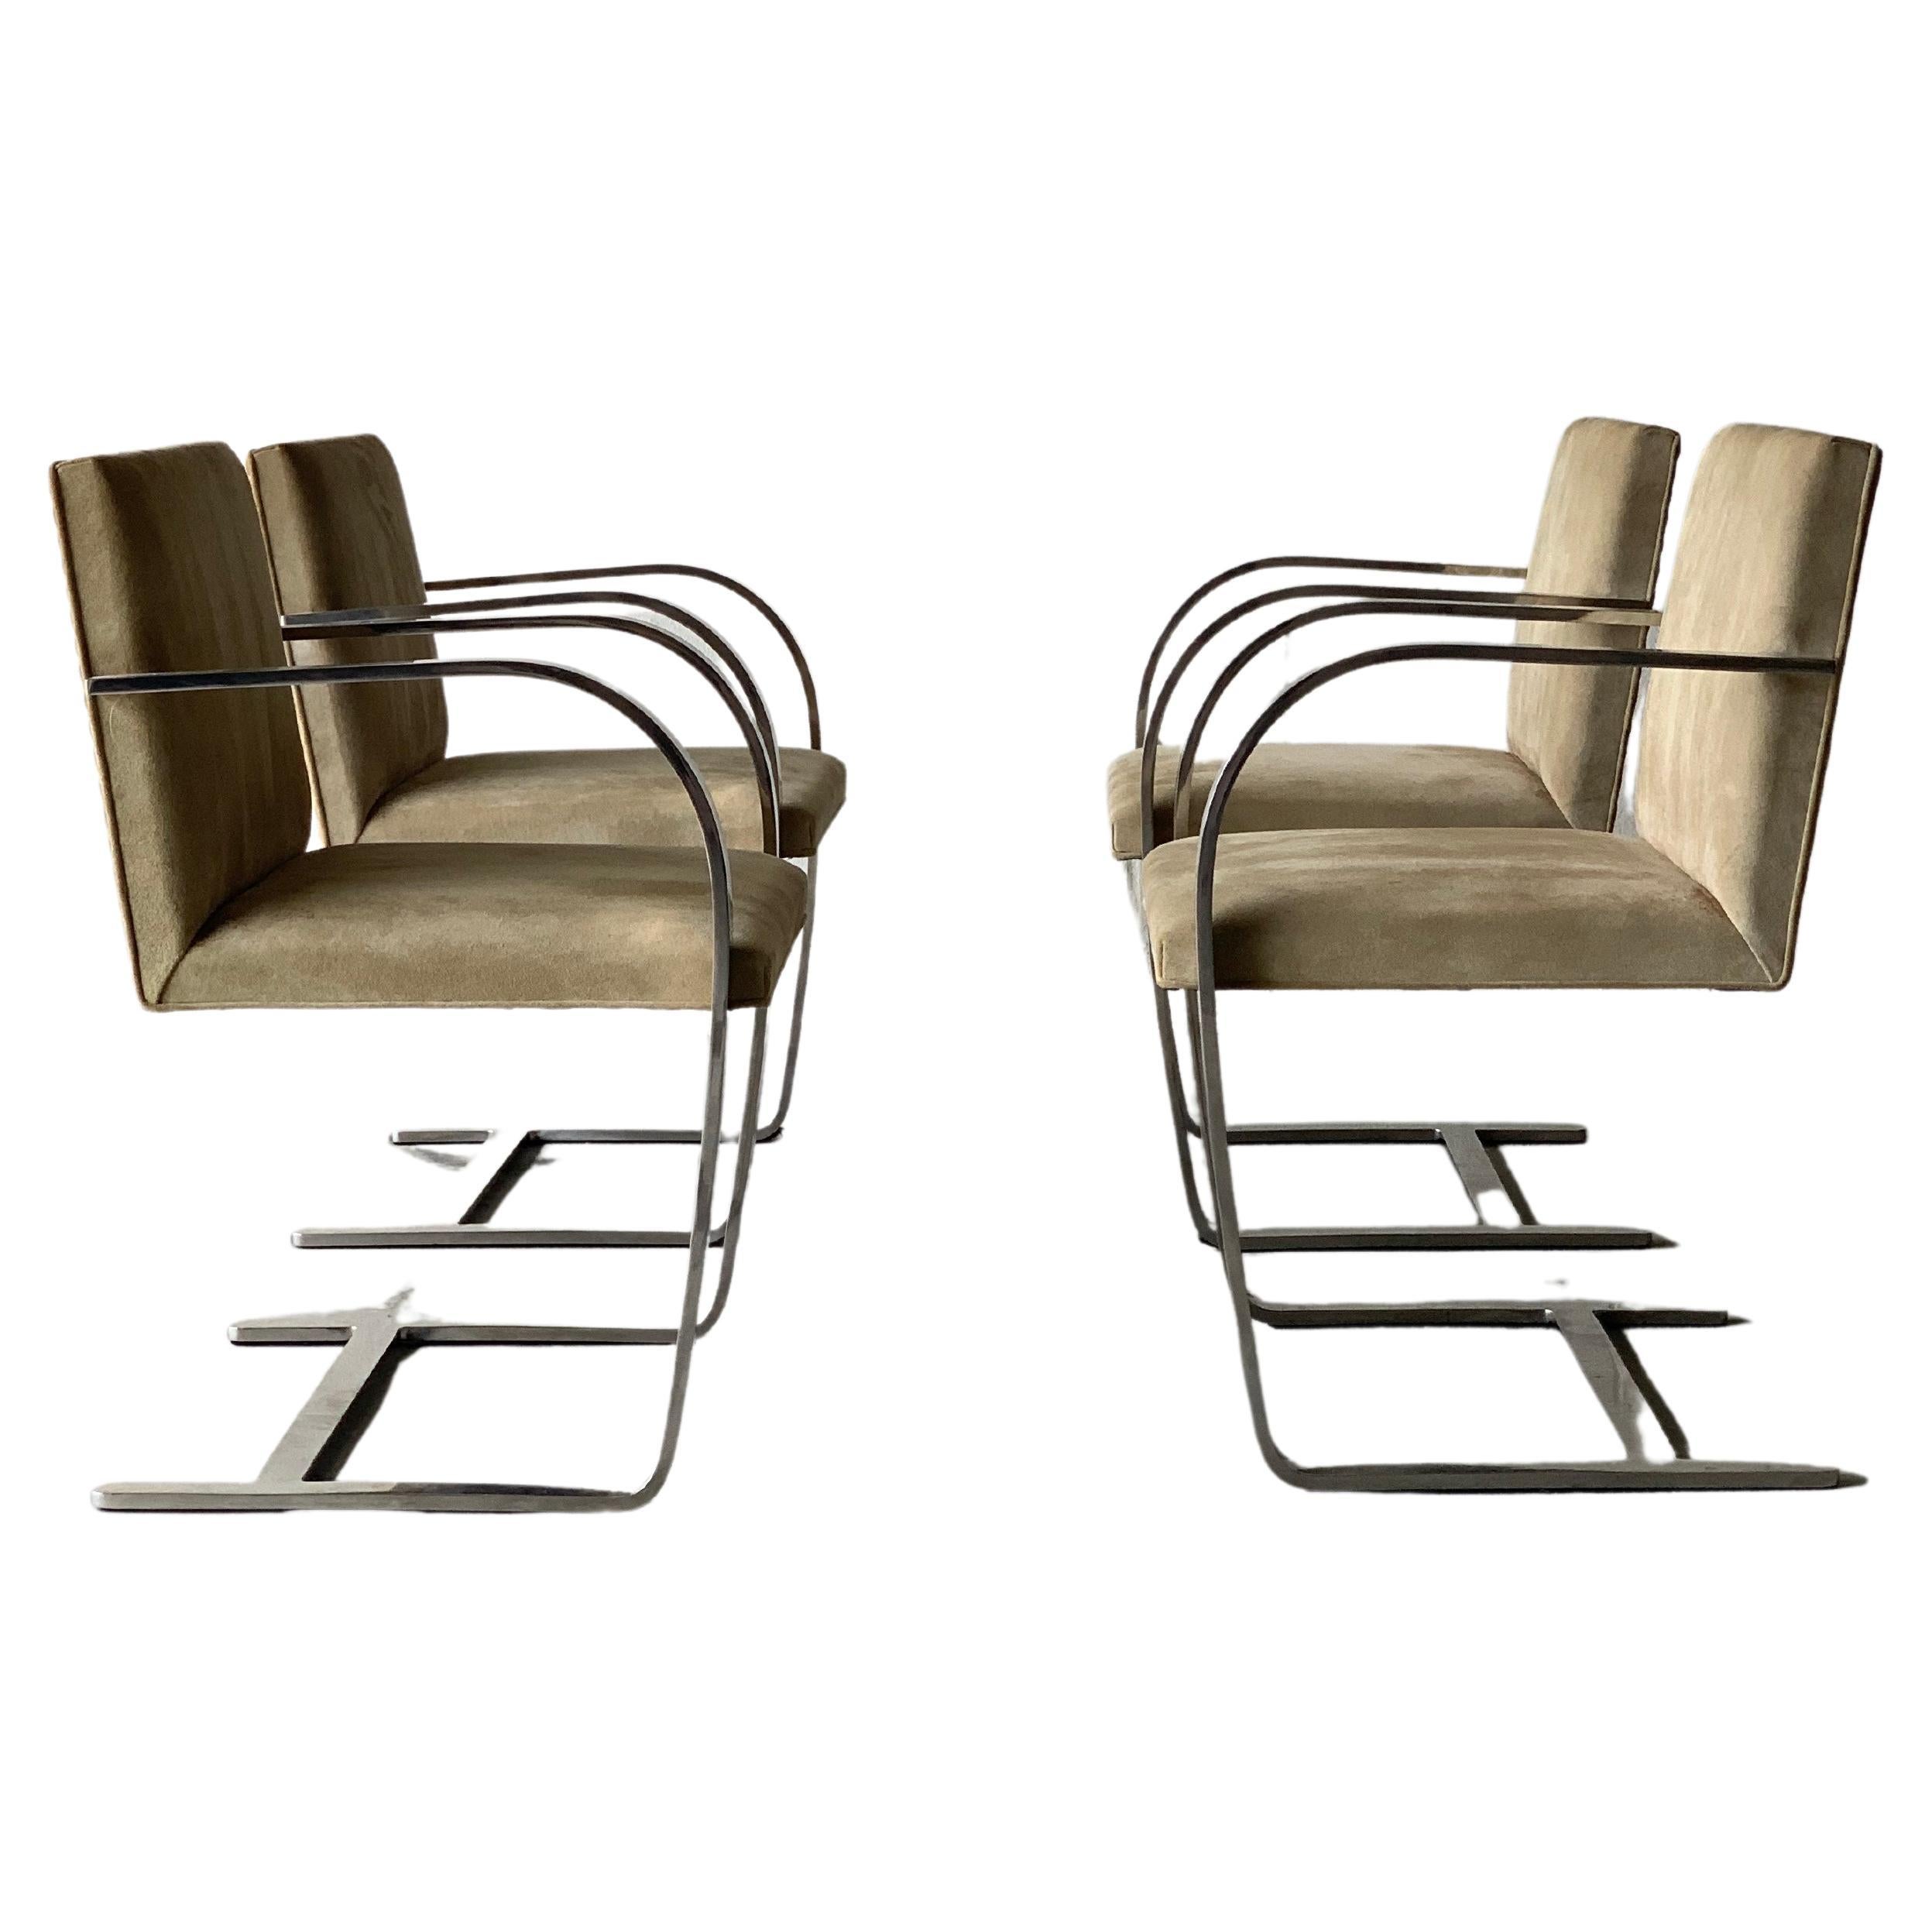 86 Modernist Chairs Van der Rohe for Knoll 